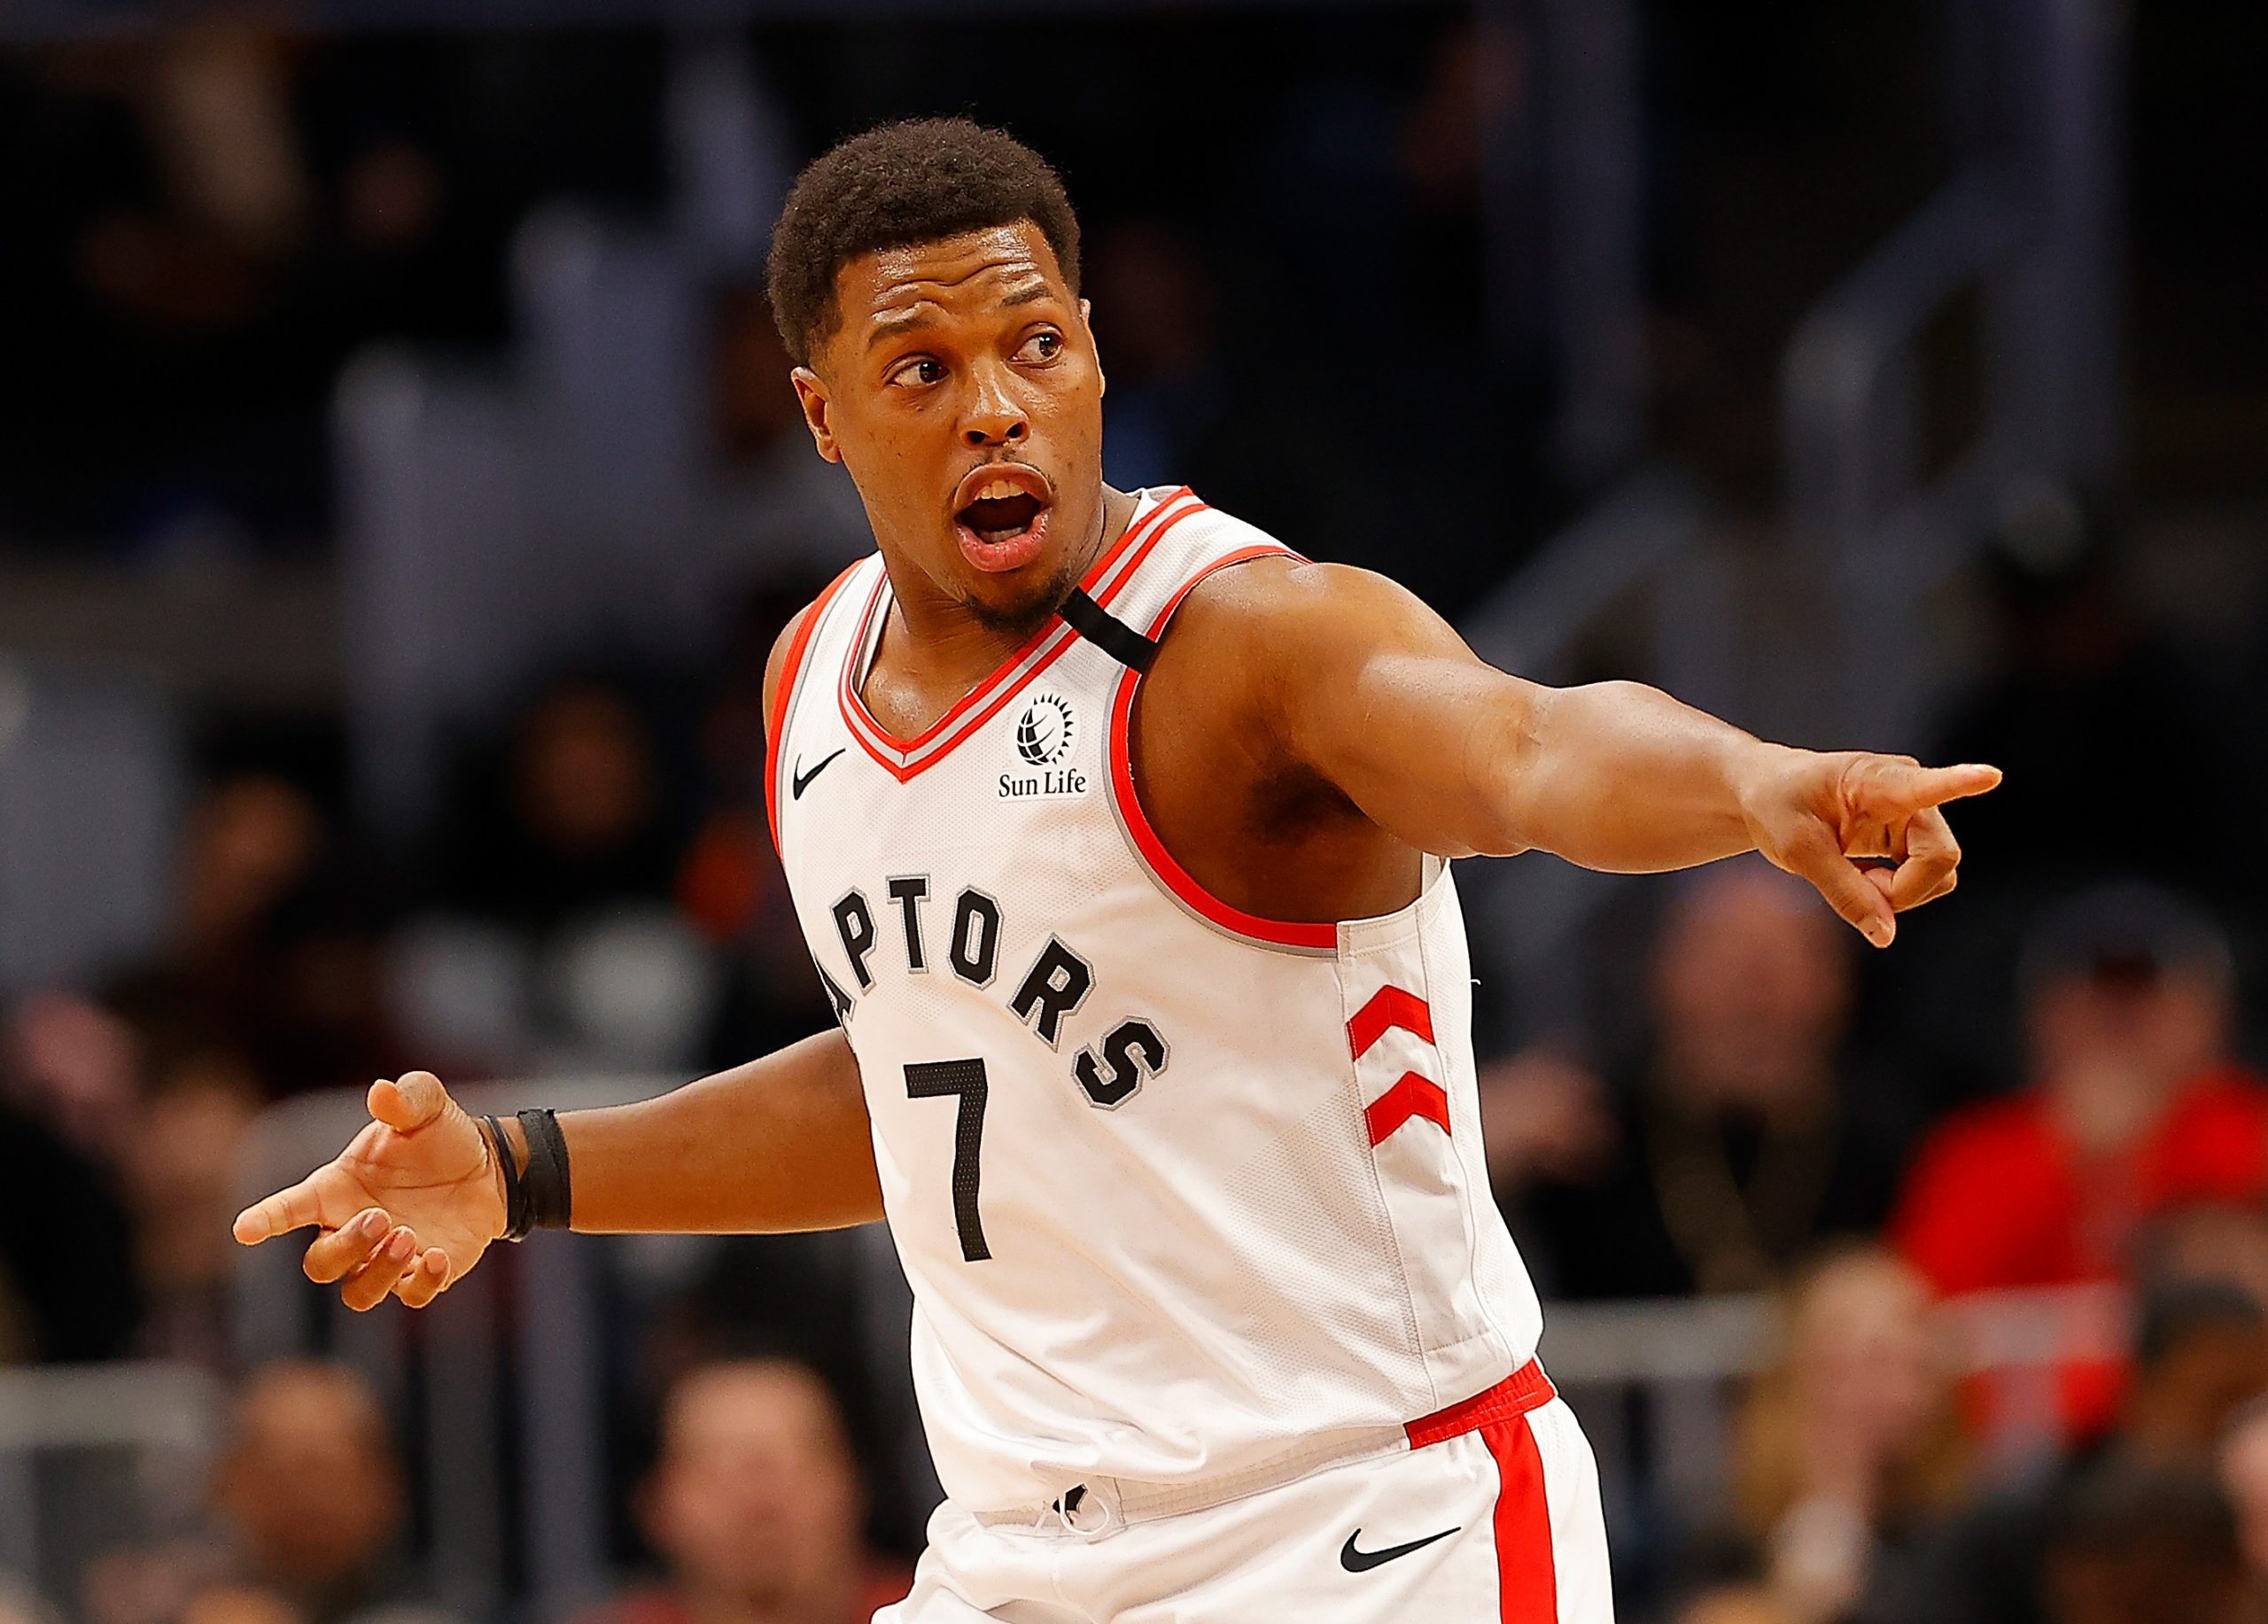 Kyle Lowry 2021 Net Worth, Salary, Records, and Endorsements